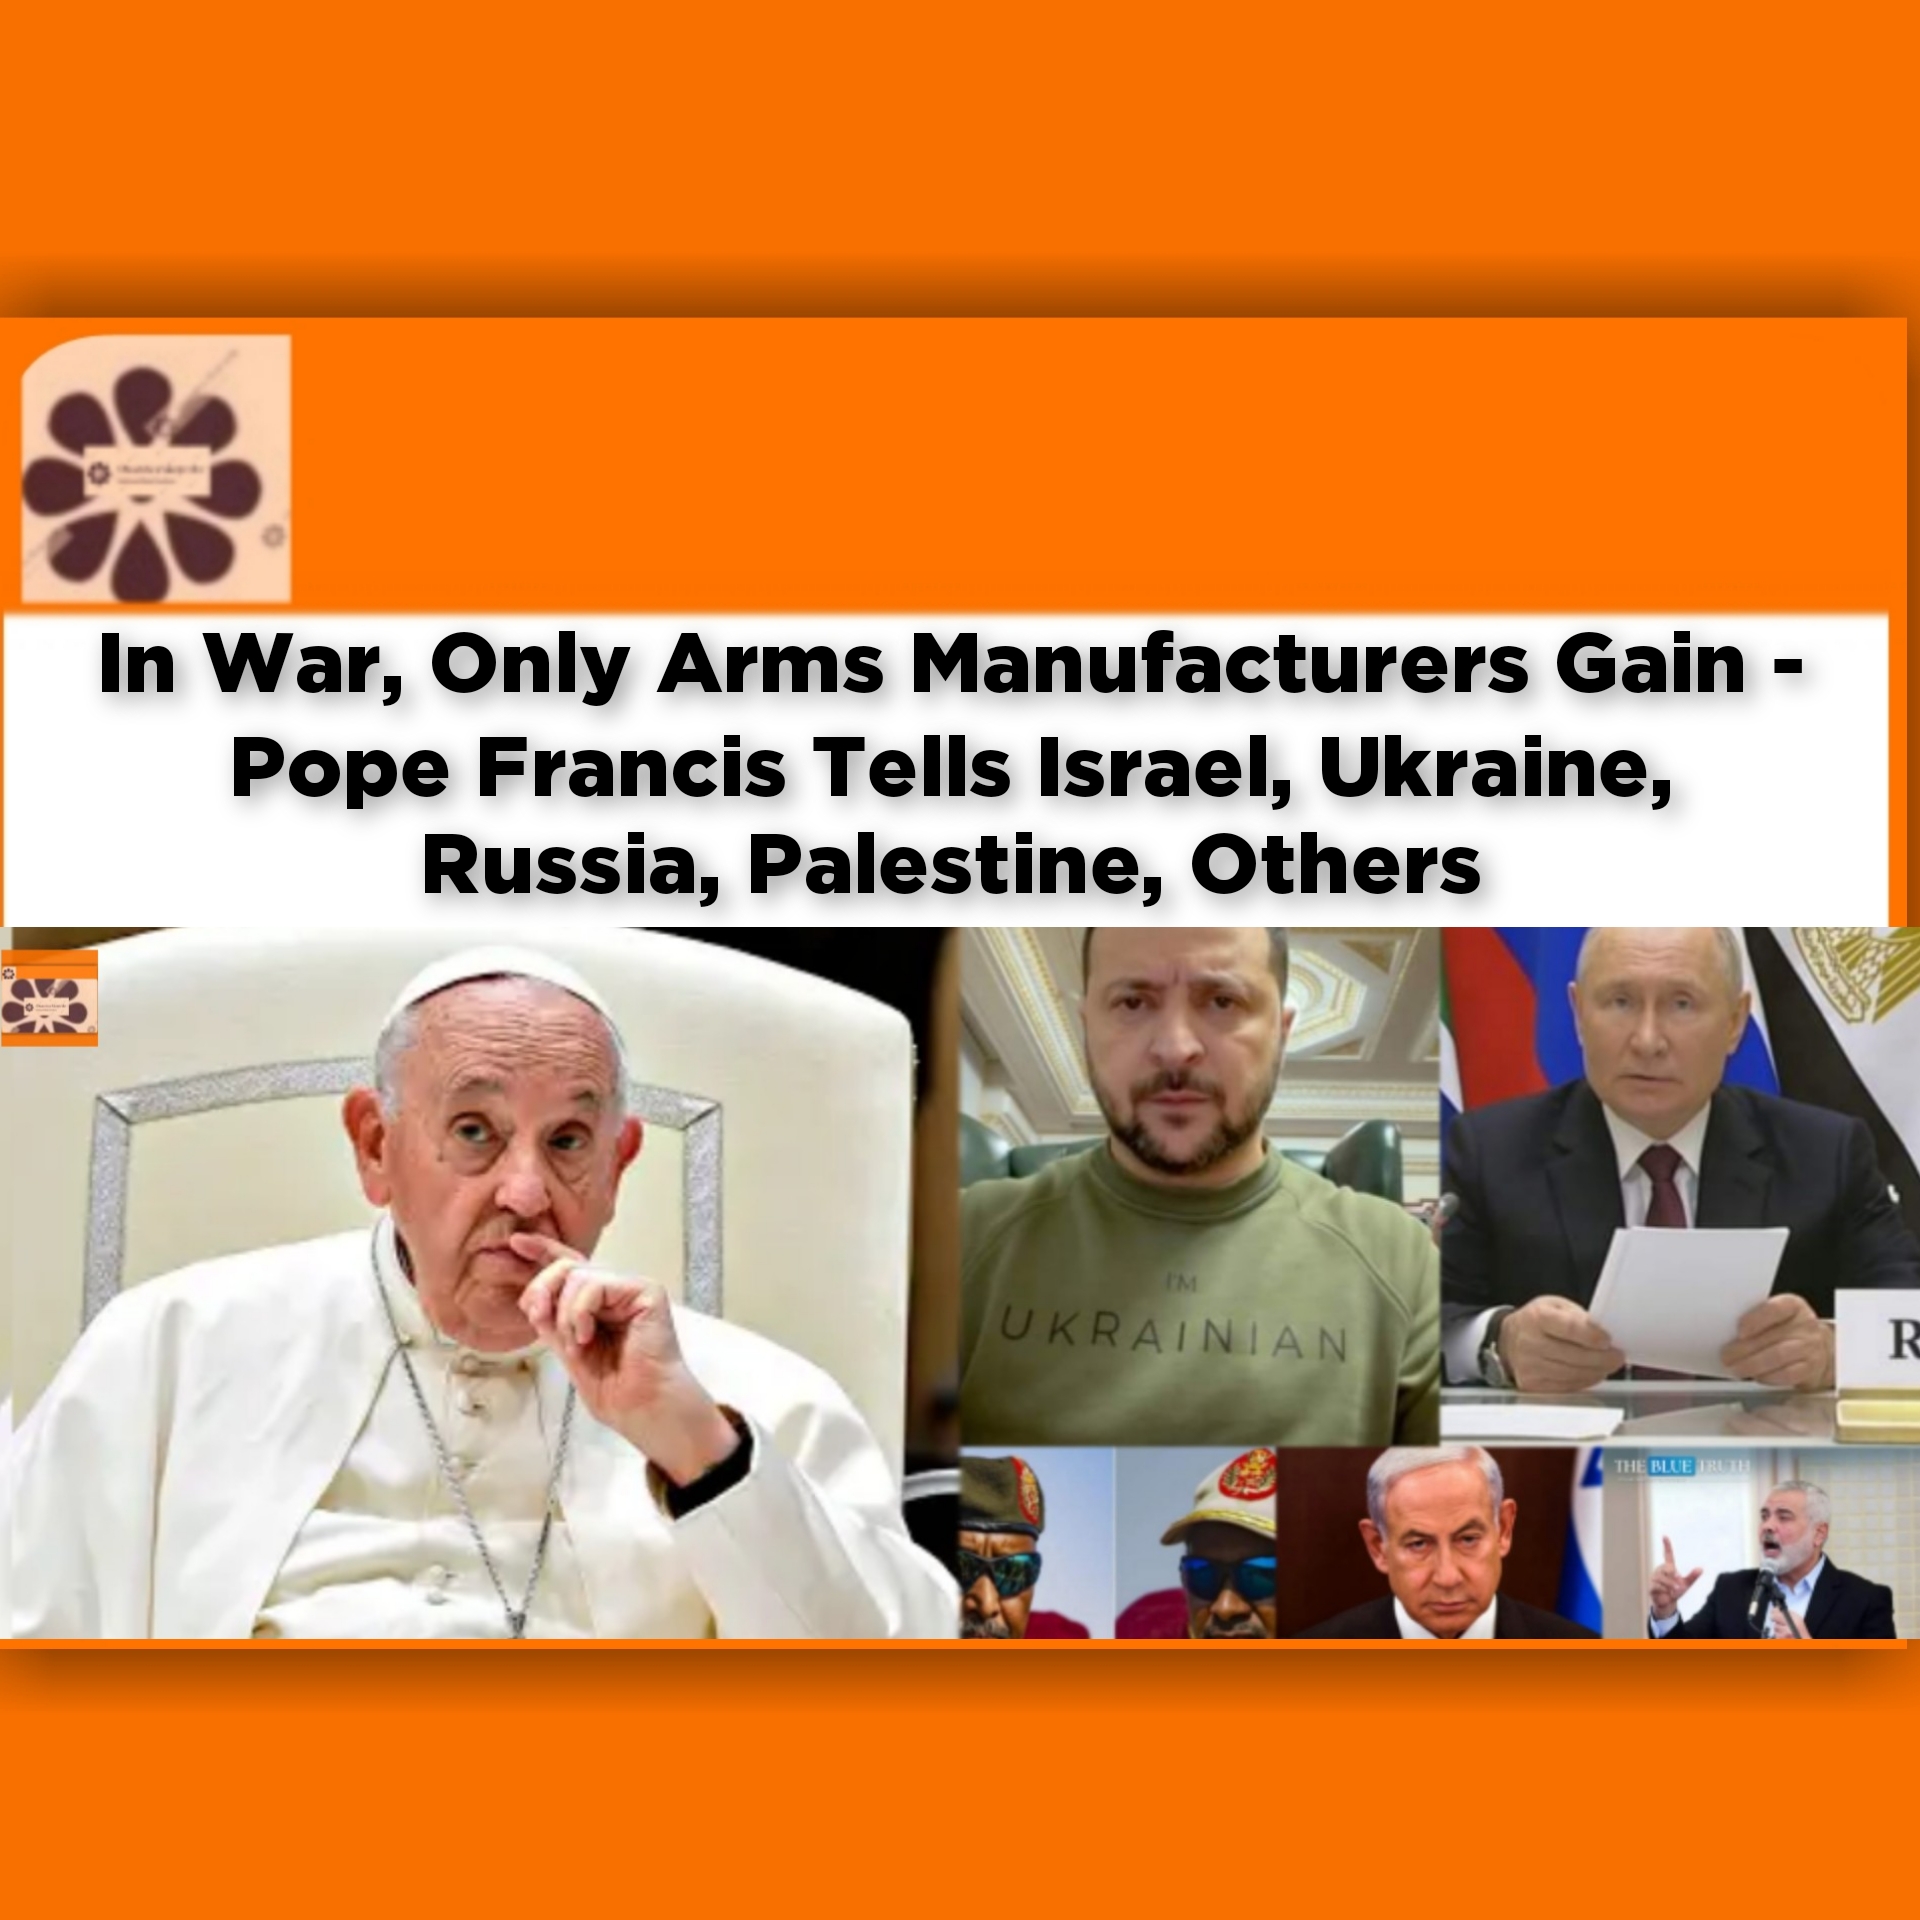 In War, Only Arms Manufacturers Gain - Pope Francis Tells Israel, Ukraine, Russia, Palestine, Others ~ OsazuwaAkonedo #Baze